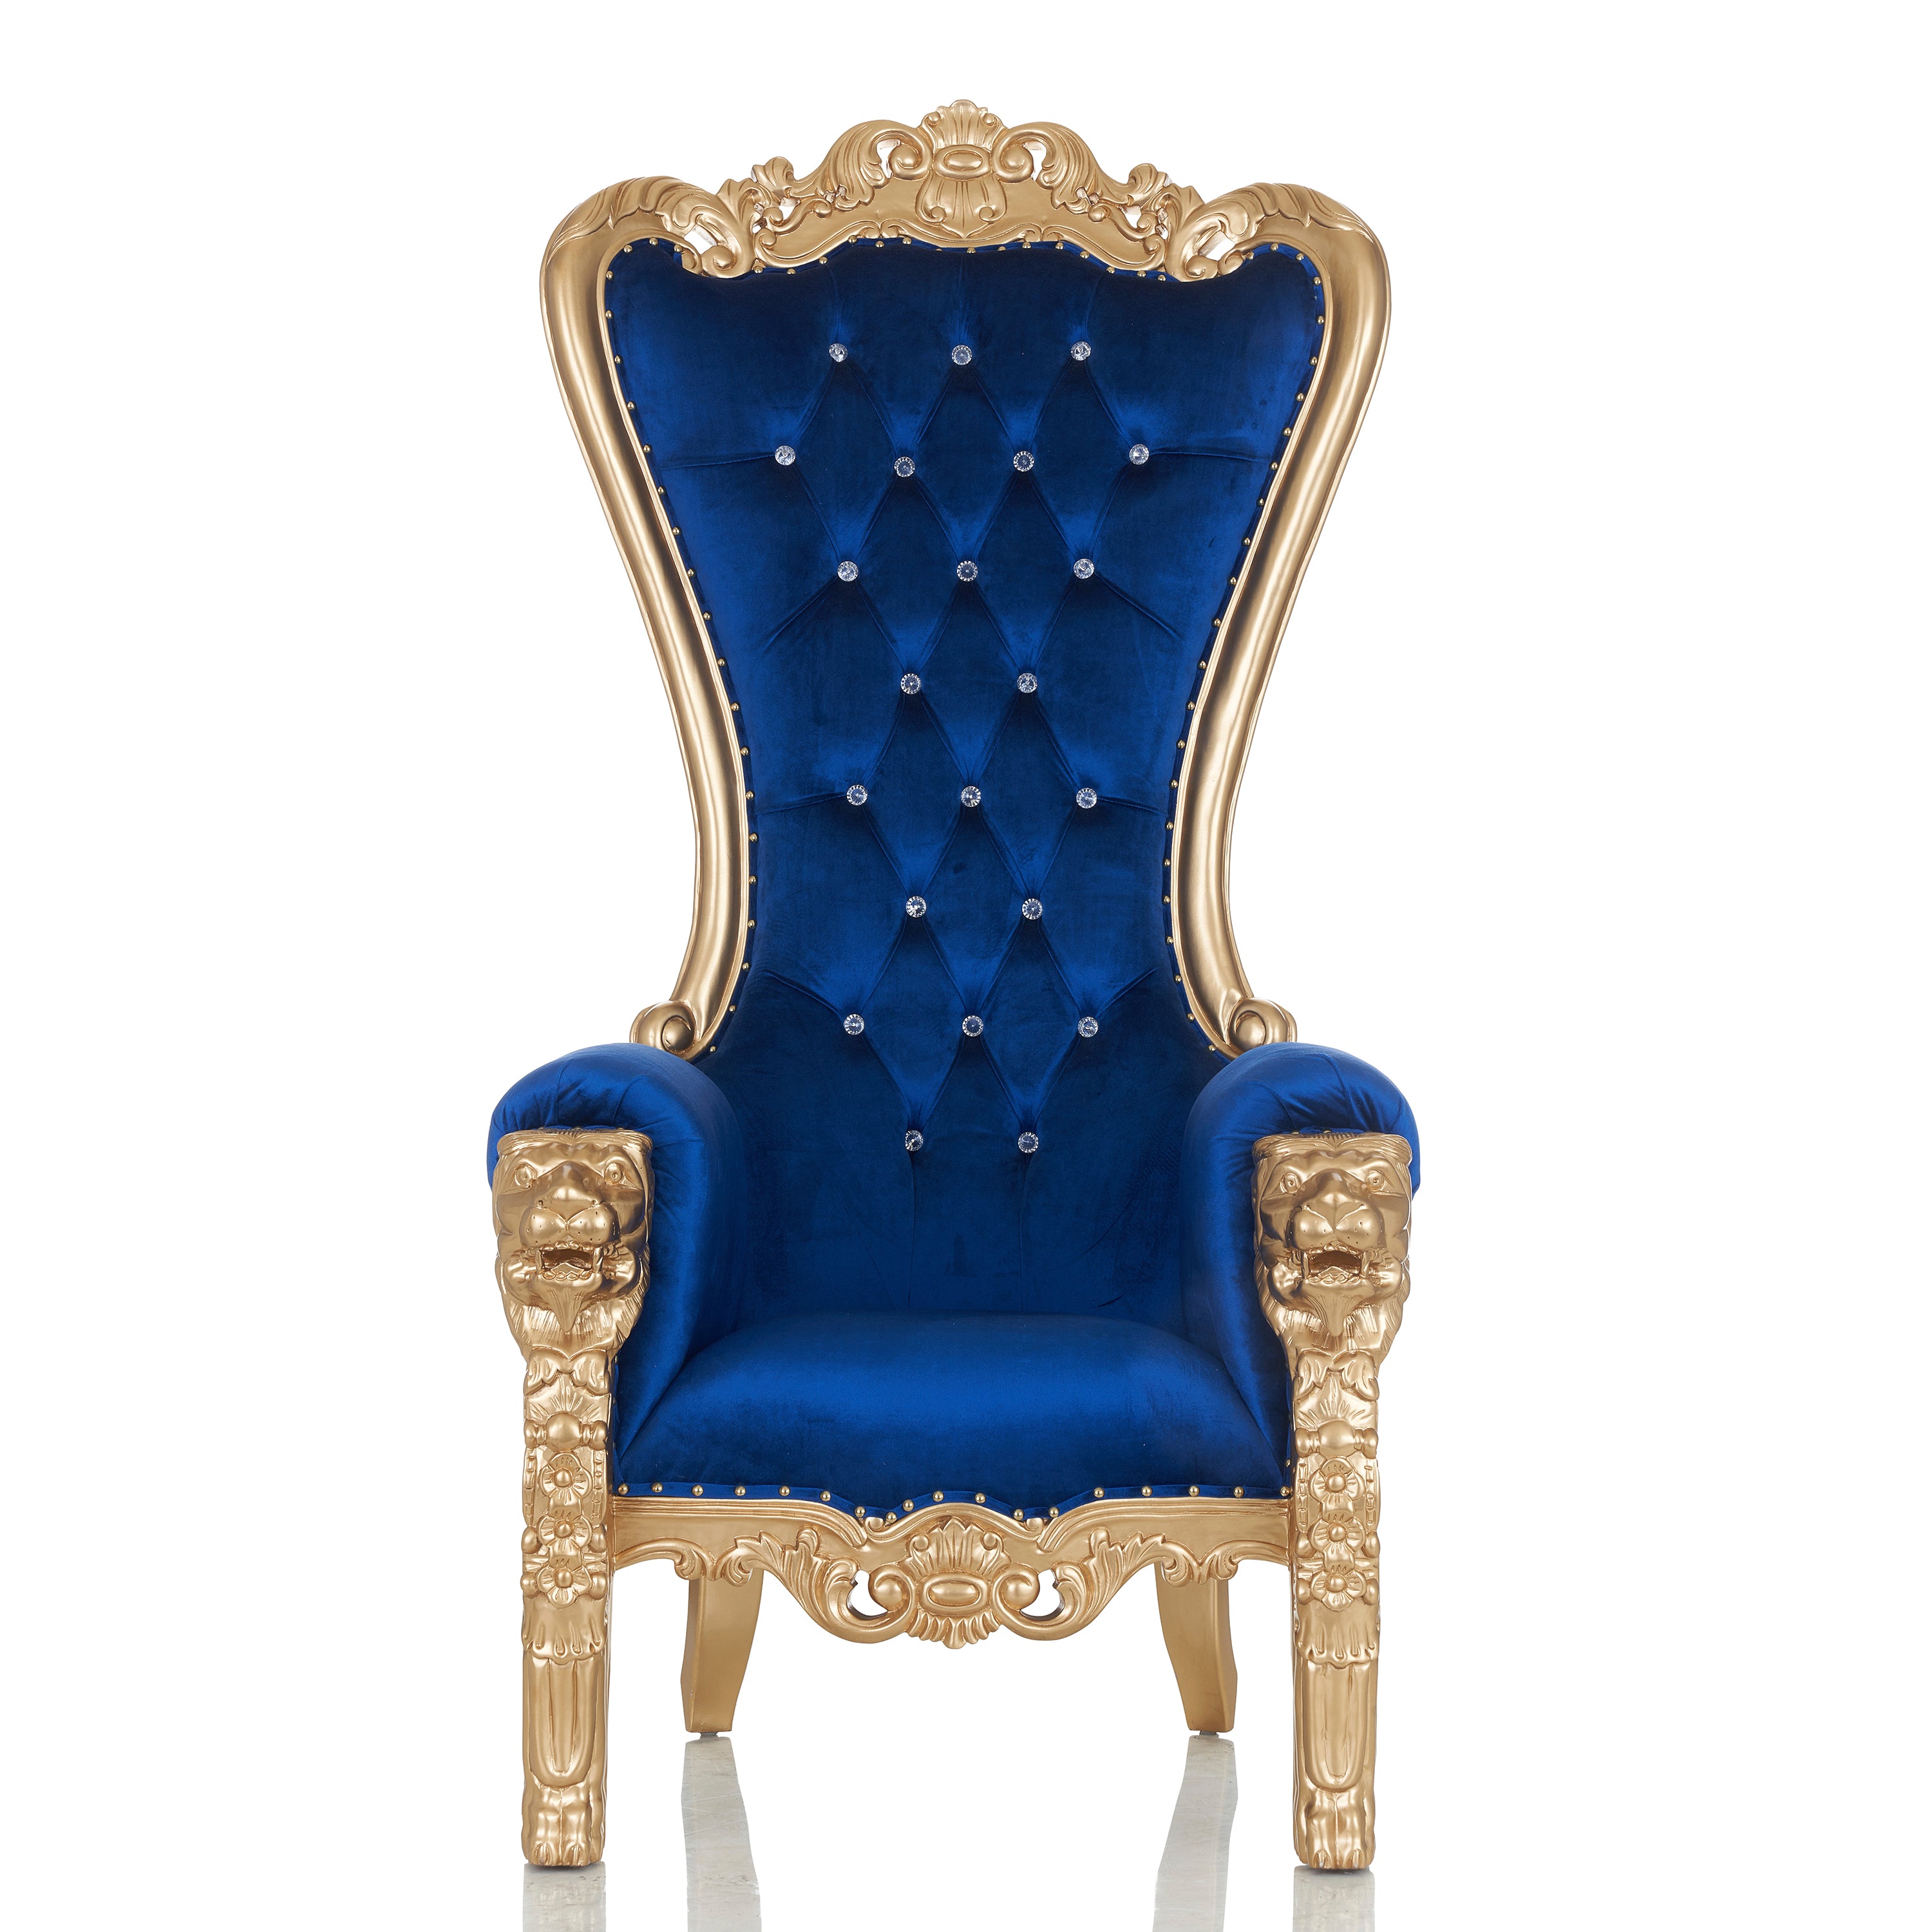 Queen and King Throne Chairs